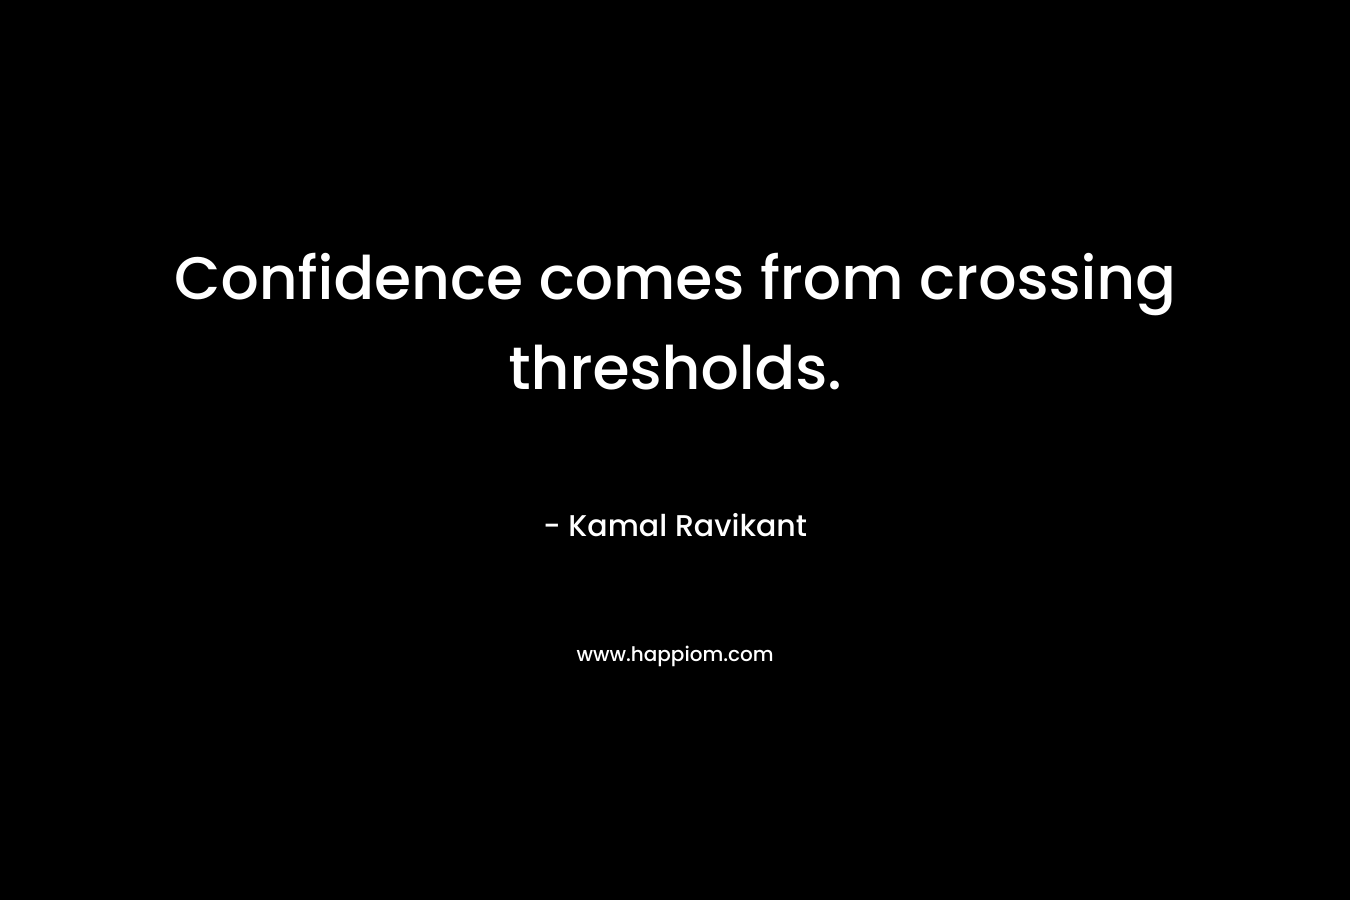 Confidence comes from crossing thresholds. – Kamal Ravikant